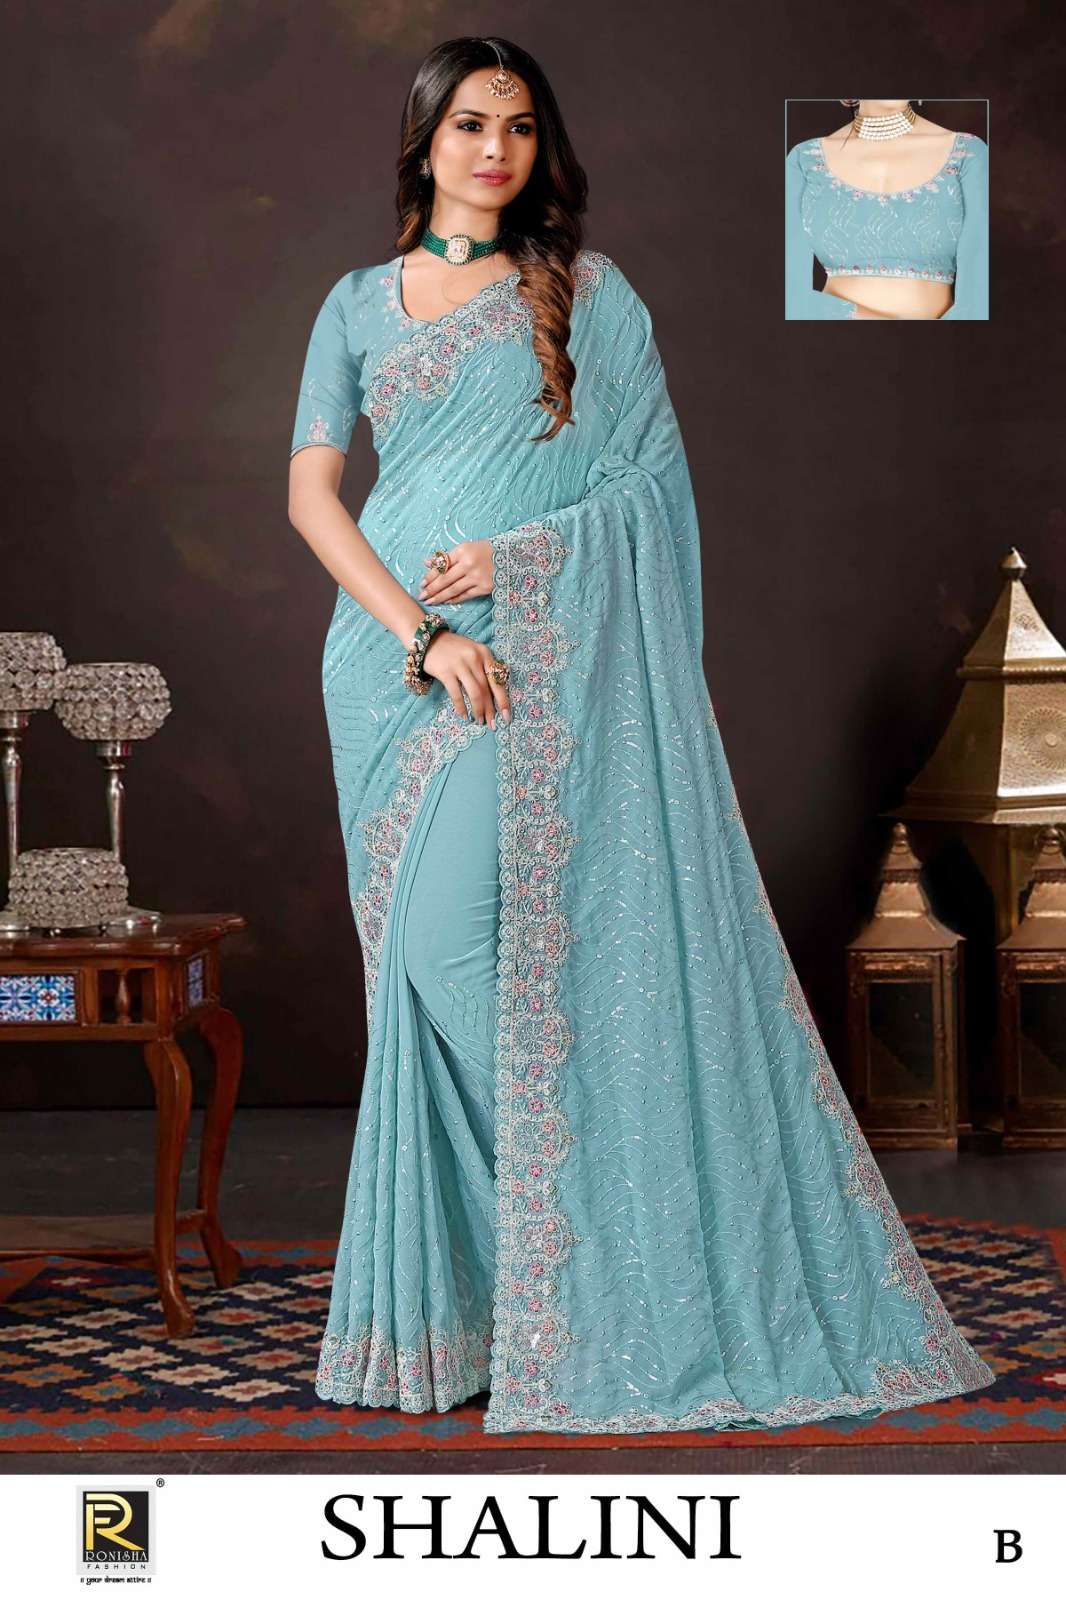 Shalini by ranjna saree designer border worked blousel super hit collecton 